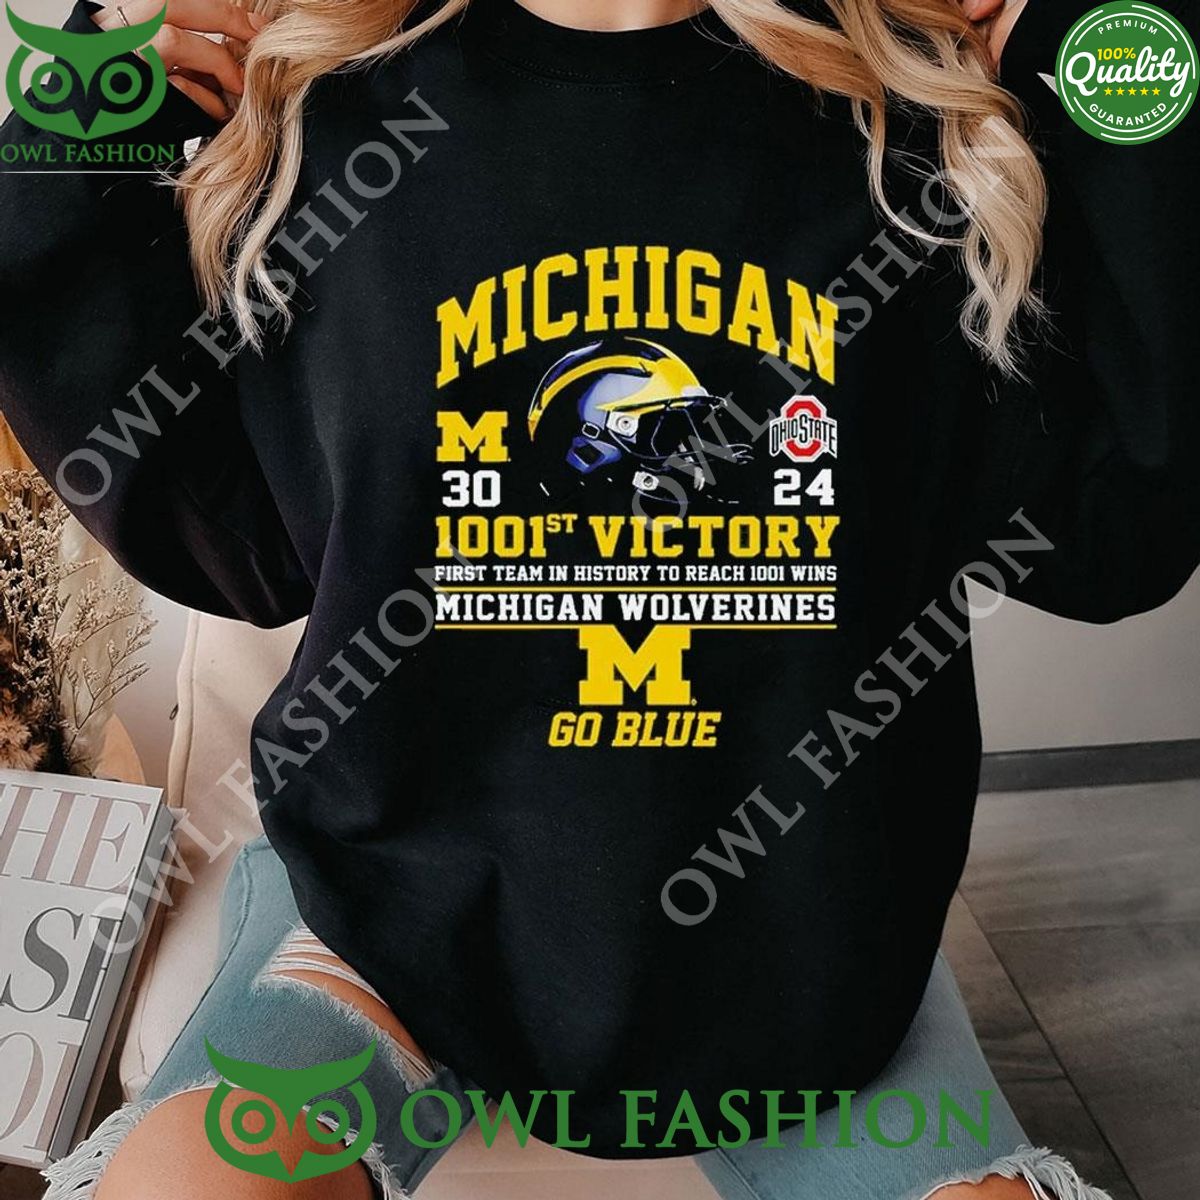 1001St Victory First Team In History To Reach 1001 Wins Michigan Wolverines Go Blue Sweatshirt